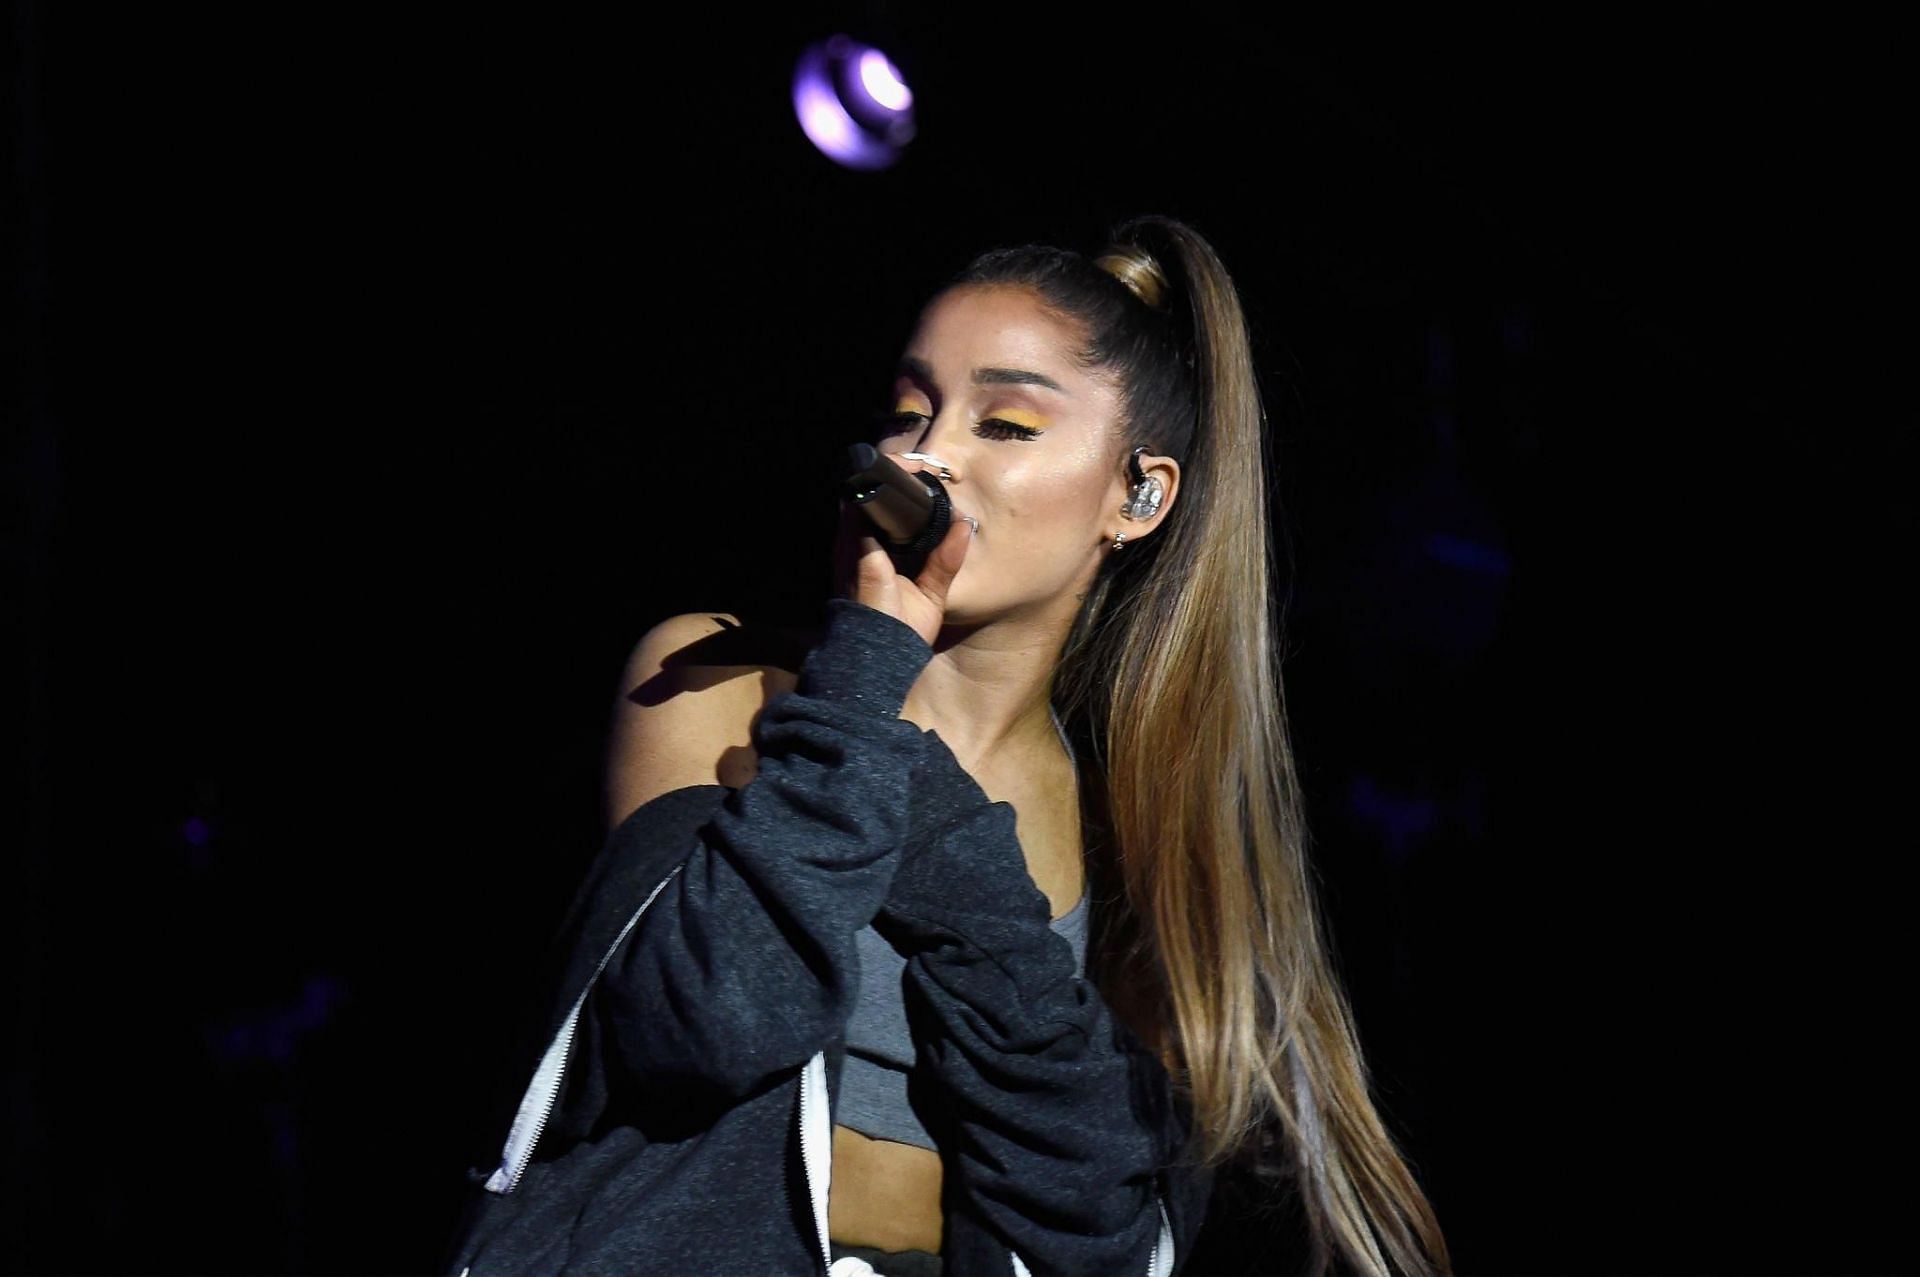 Ariana Grande at the Concert for Charlottesville (Image via Getty Images)